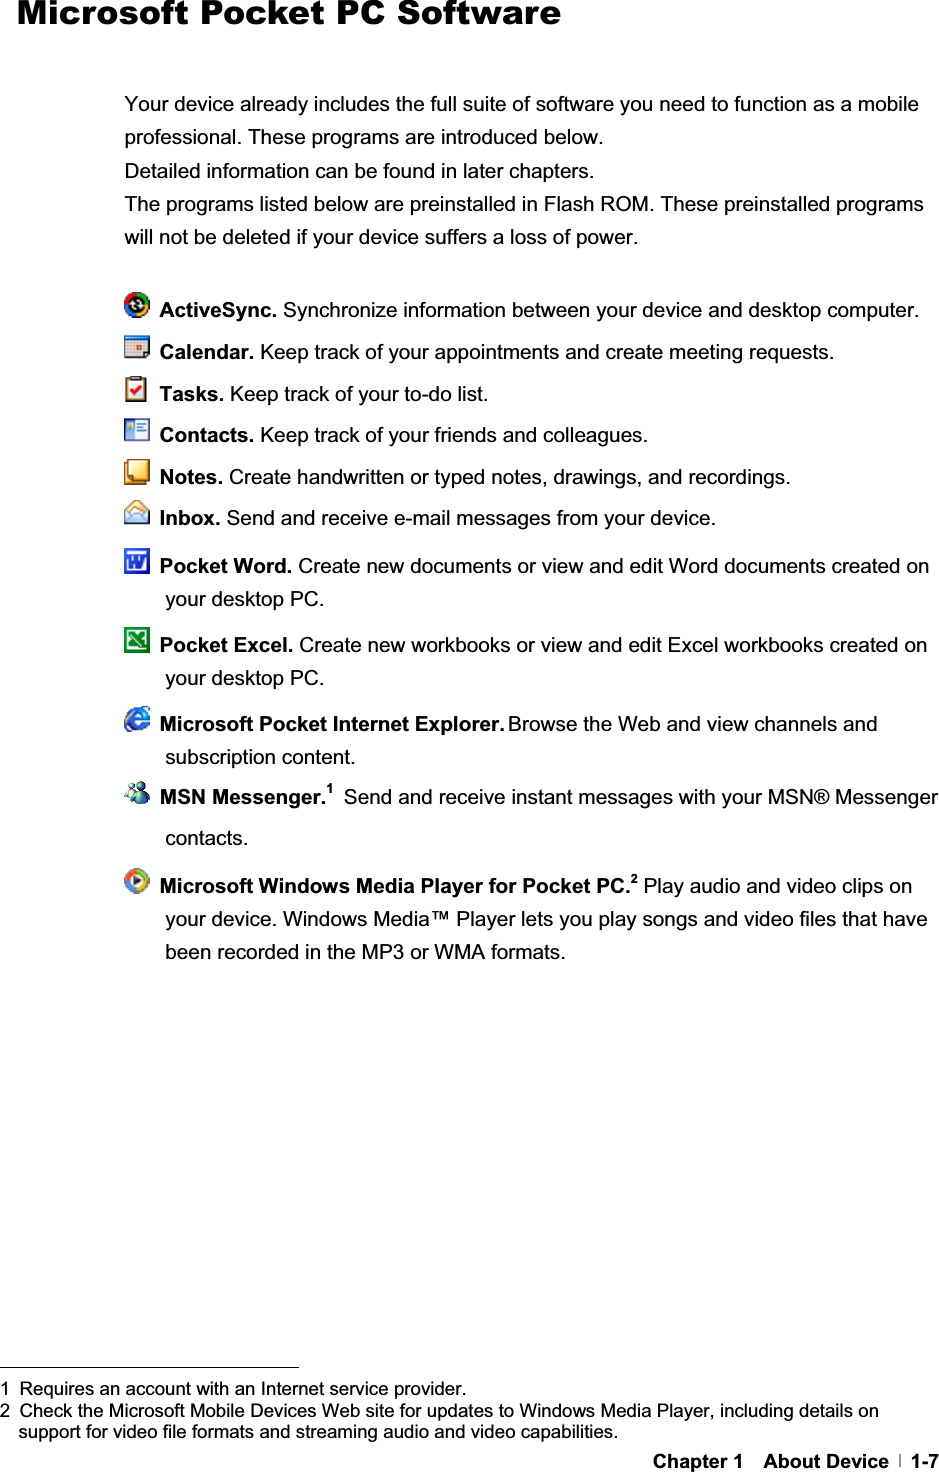 G G GChapter 1  About Device  1-7  Microsoft Pocket PC Software Your device already includes the full suite of software you need to function as a mobile professional. These programs are introduced below. Detailed information can be found in later chapters. The programs listed below are preinstalled in Flash ROM. These preinstalled programs will not be deleted if your device suffers a loss of power. ActiveSync. Synchronize information between your device and desktop computer.  Calendar. Keep track of your appointments and create meeting requests.  Tasks. Keep track of your to-do list.  Contacts. Keep track of your friends and colleagues.  Notes. Create handwritten or typed notes, drawings, and recordings.  Inbox. Send and receive e-mail messages from your device.  Pocket Word. Create new documents or view and edit Word documents created on your desktop PC.  Pocket Excel. Create new workbooks or view and edit Excel workbooks created on your desktop PC.   Microsoft Pocket Internet Explorer. Browse the Web and view channels and subscription content.  MSN Messenger.1Send and receive instant messages with your MSN® Messenger contacts.   Microsoft Windows Media Player for Pocket PC.2Play audio and video clips on your device. Windows Media™ Player lets you play songs and video files that have been recorded in the MP3 or WMA formats. GGGGGGGGGGGGGGGGGGGGGGGGGGGGGGGGGGGGGGGGGGGG1  Requires an account with an Internet service provider. 2  Check the Microsoft Mobile Devices Web site for updates to Windows Media Player, including details on support for video file formats and streaming audio and video capabilities.#